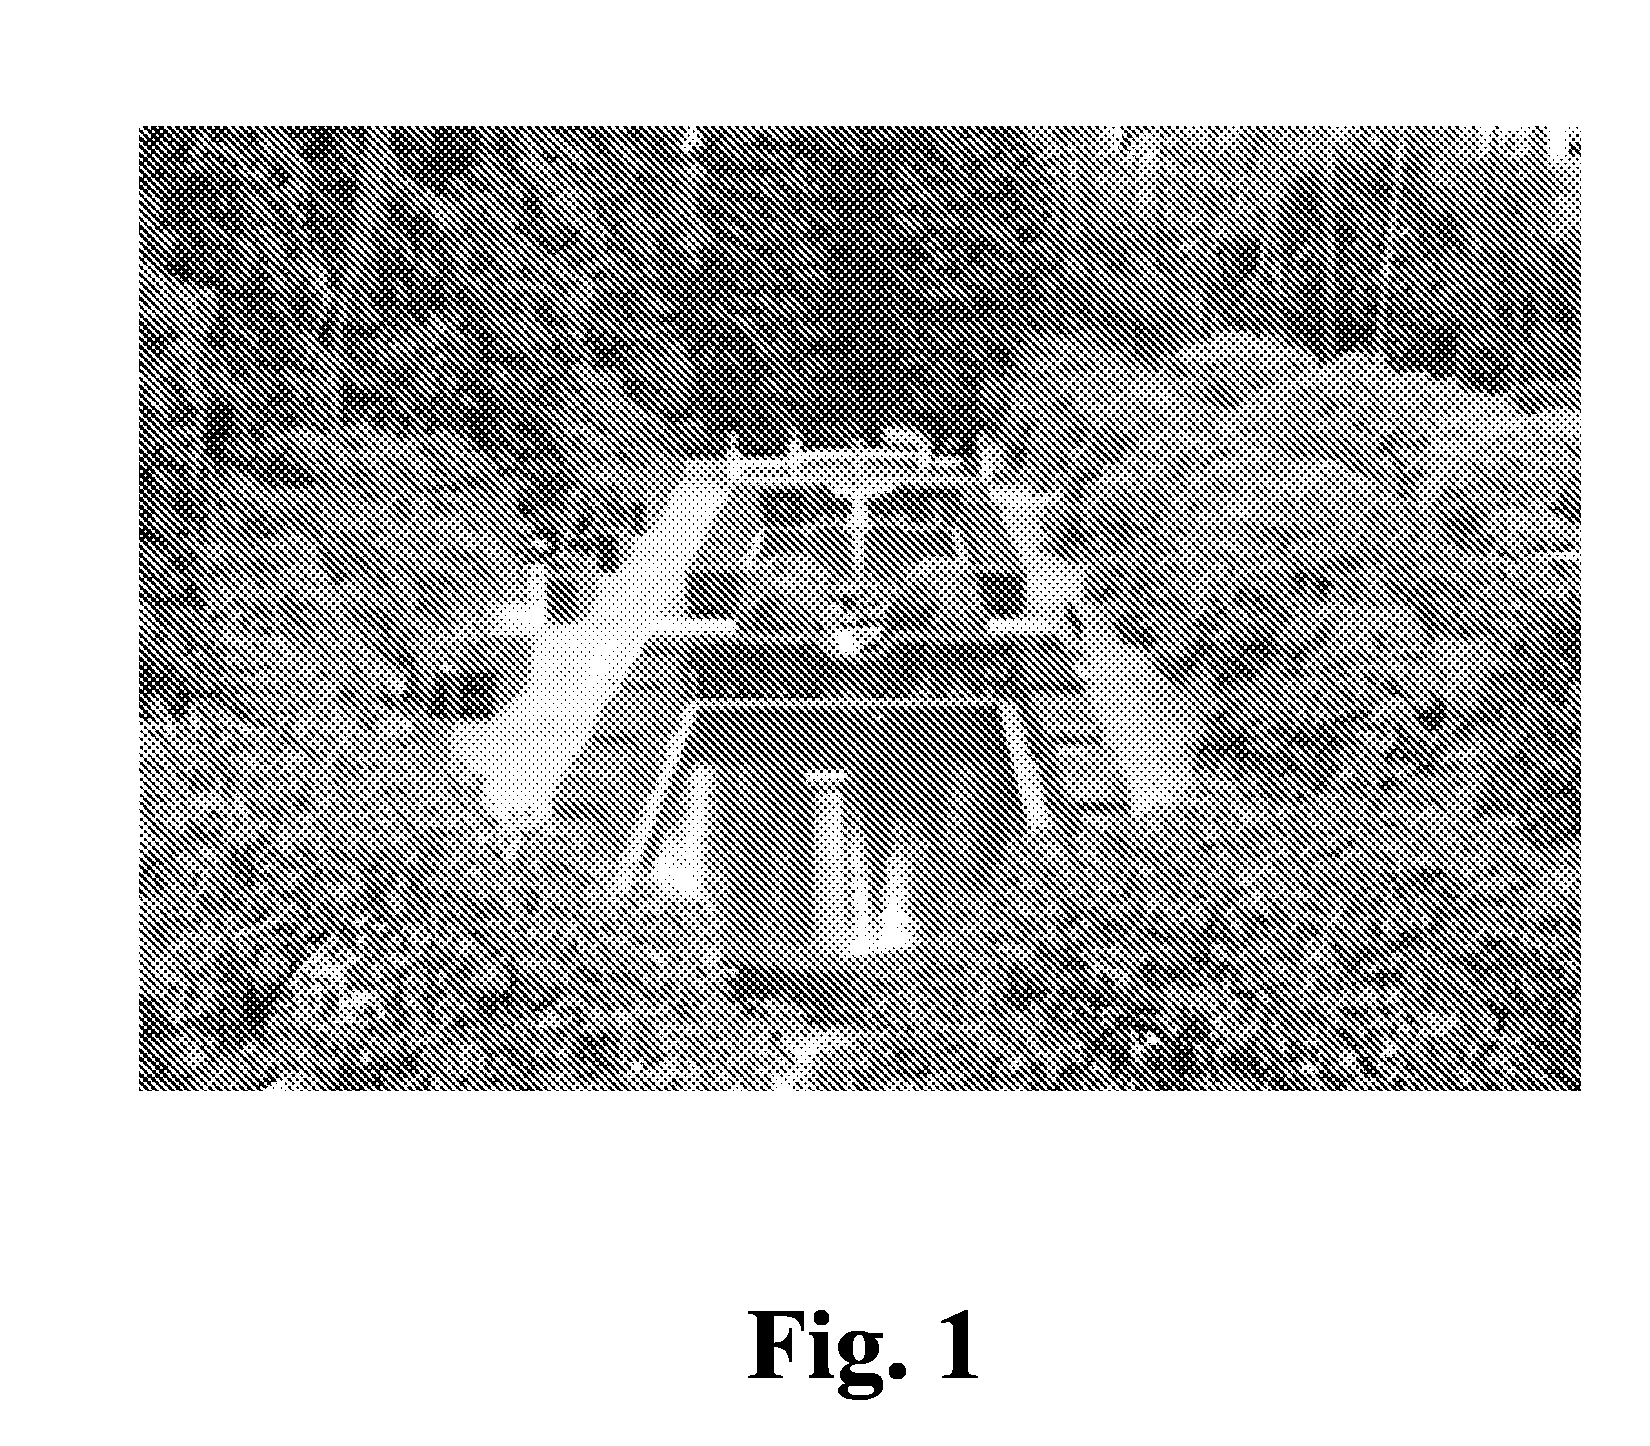 Method for efficient representation and processing of color pixel data in digital pathology images